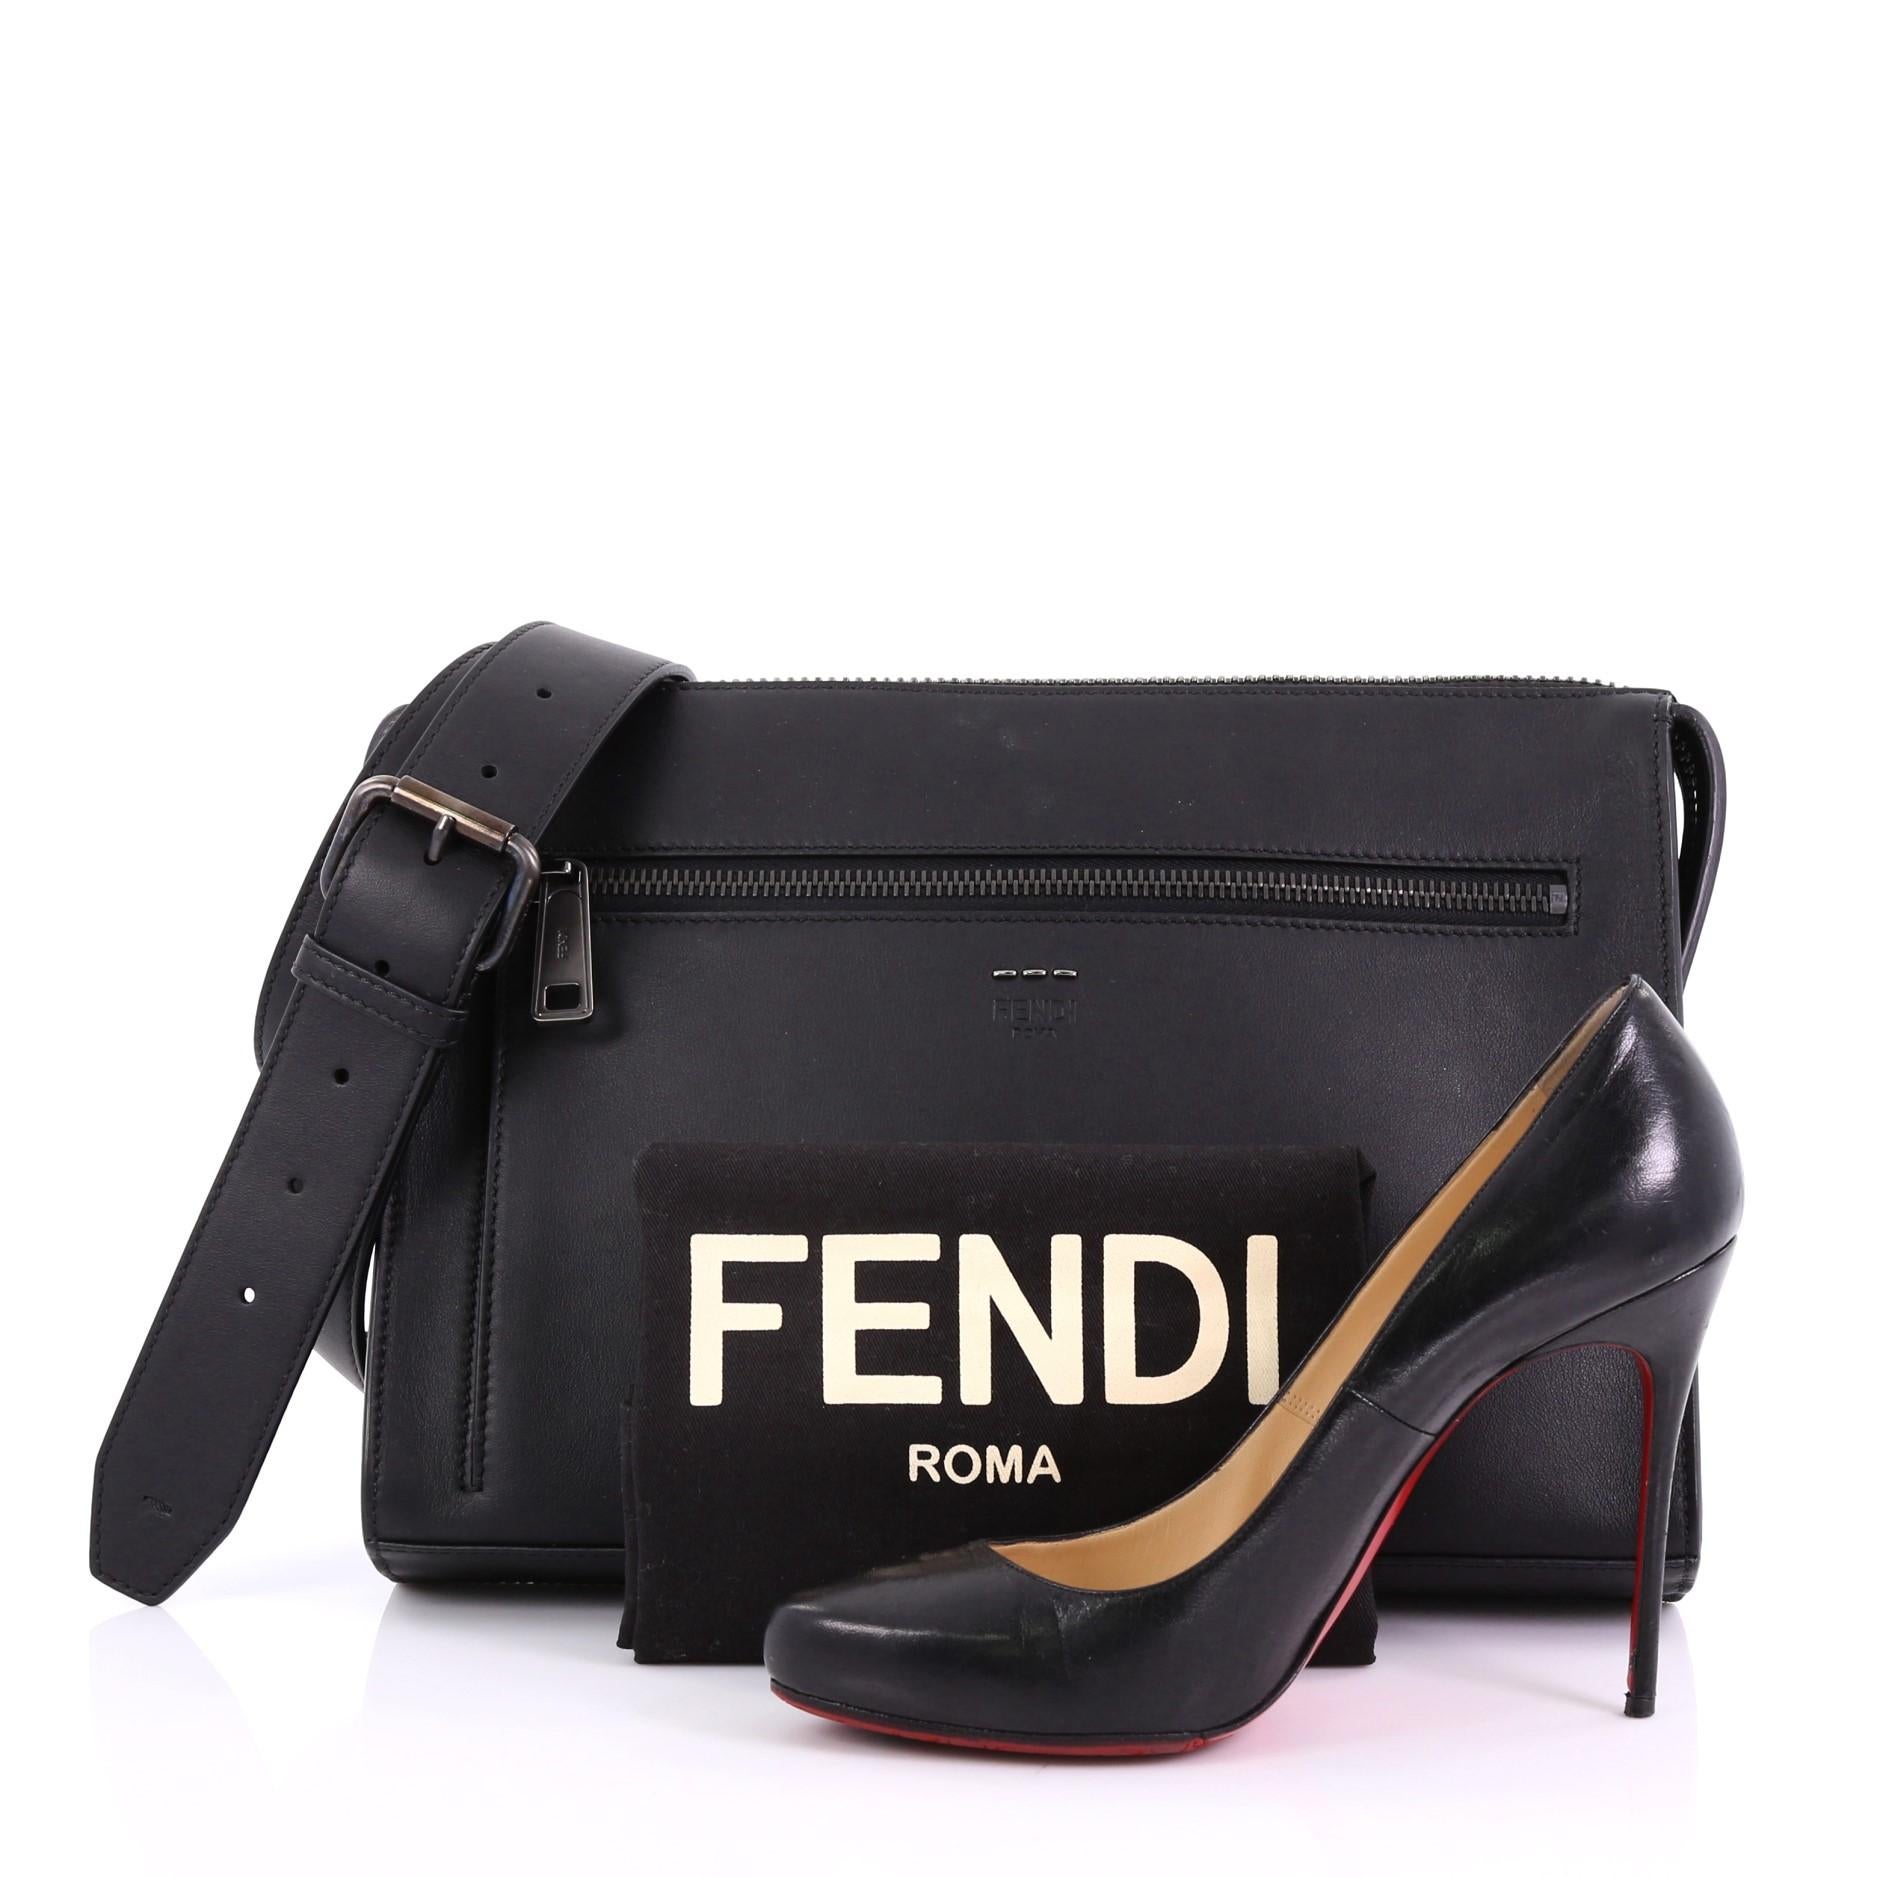 This Fendi Convertible Document Holder Leather Medium, crafted in black leather features an adjustable shoulder strap, exterior front pocket and gunmetal-tone hardware. Its zip closure opens to a black fabric interior with zip and slip pockets.